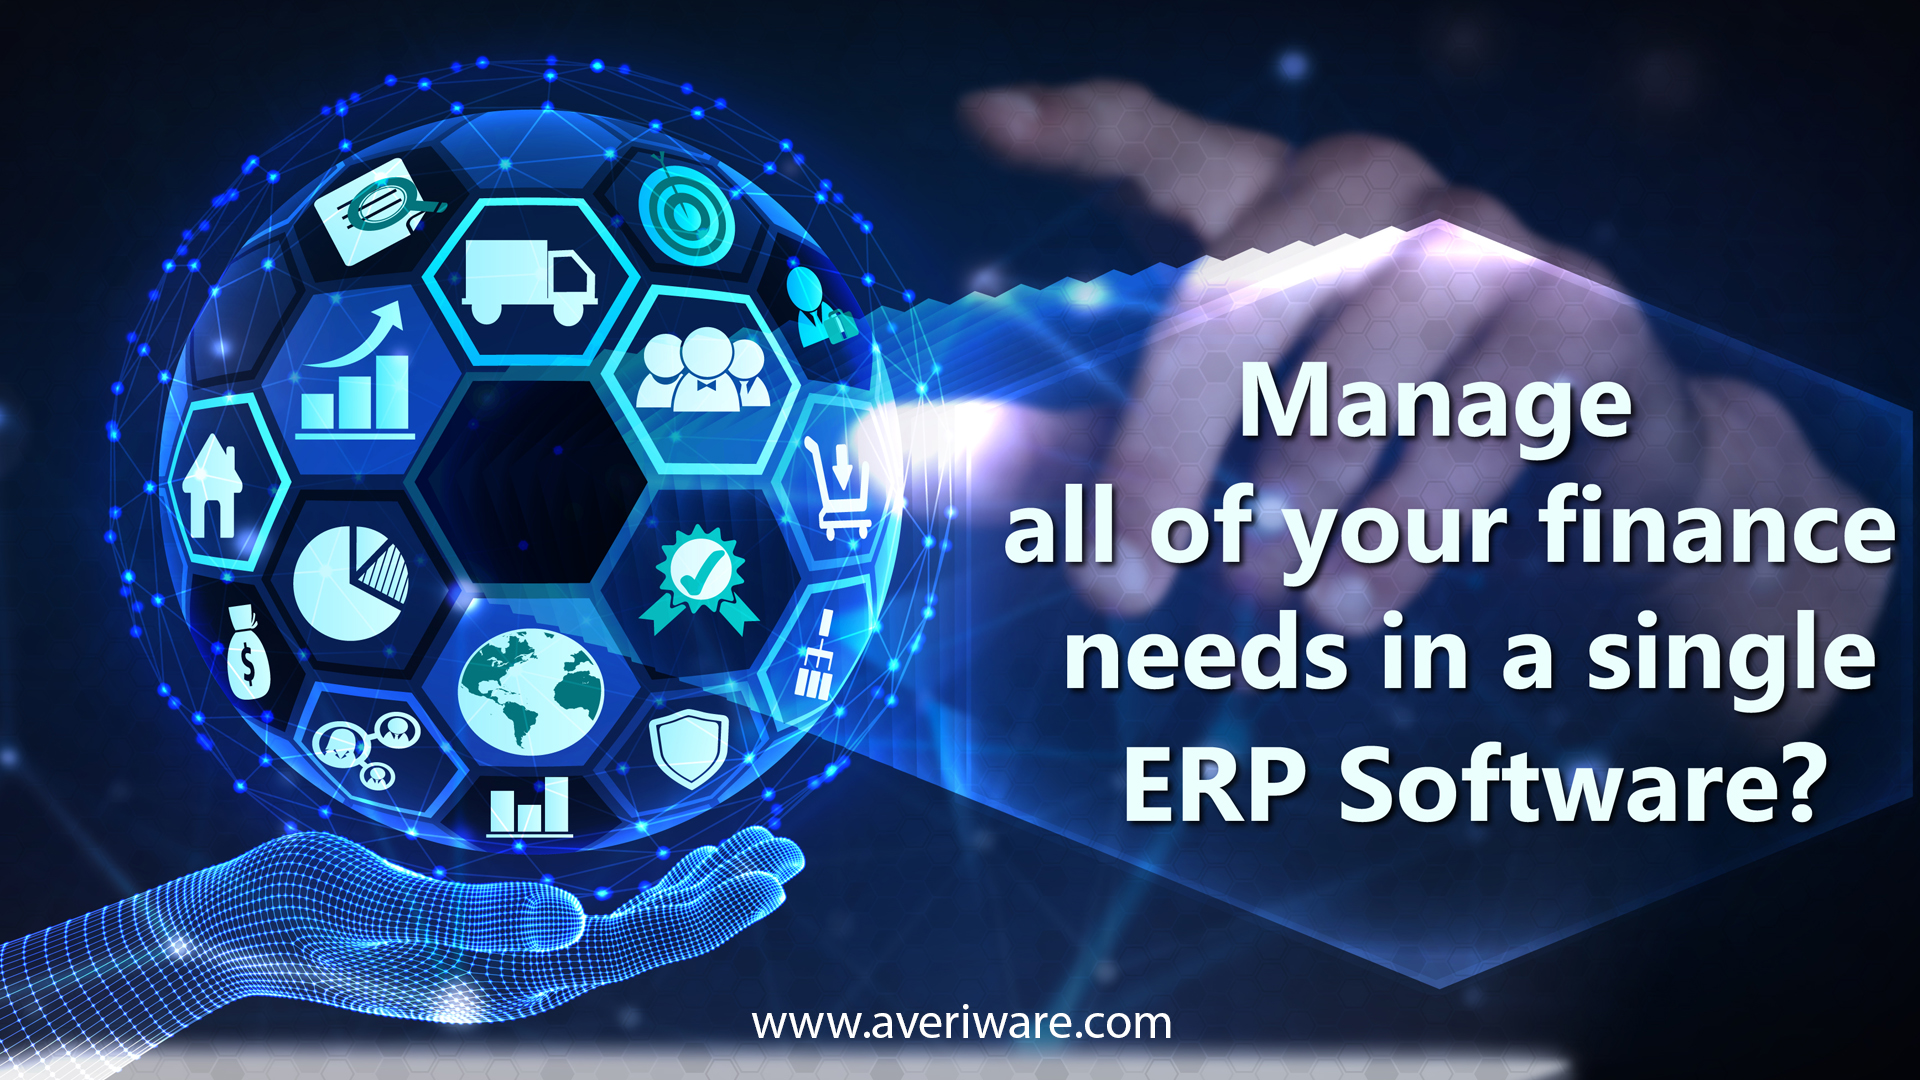 Want to Manage all of your finance needs in a single ERP Software?